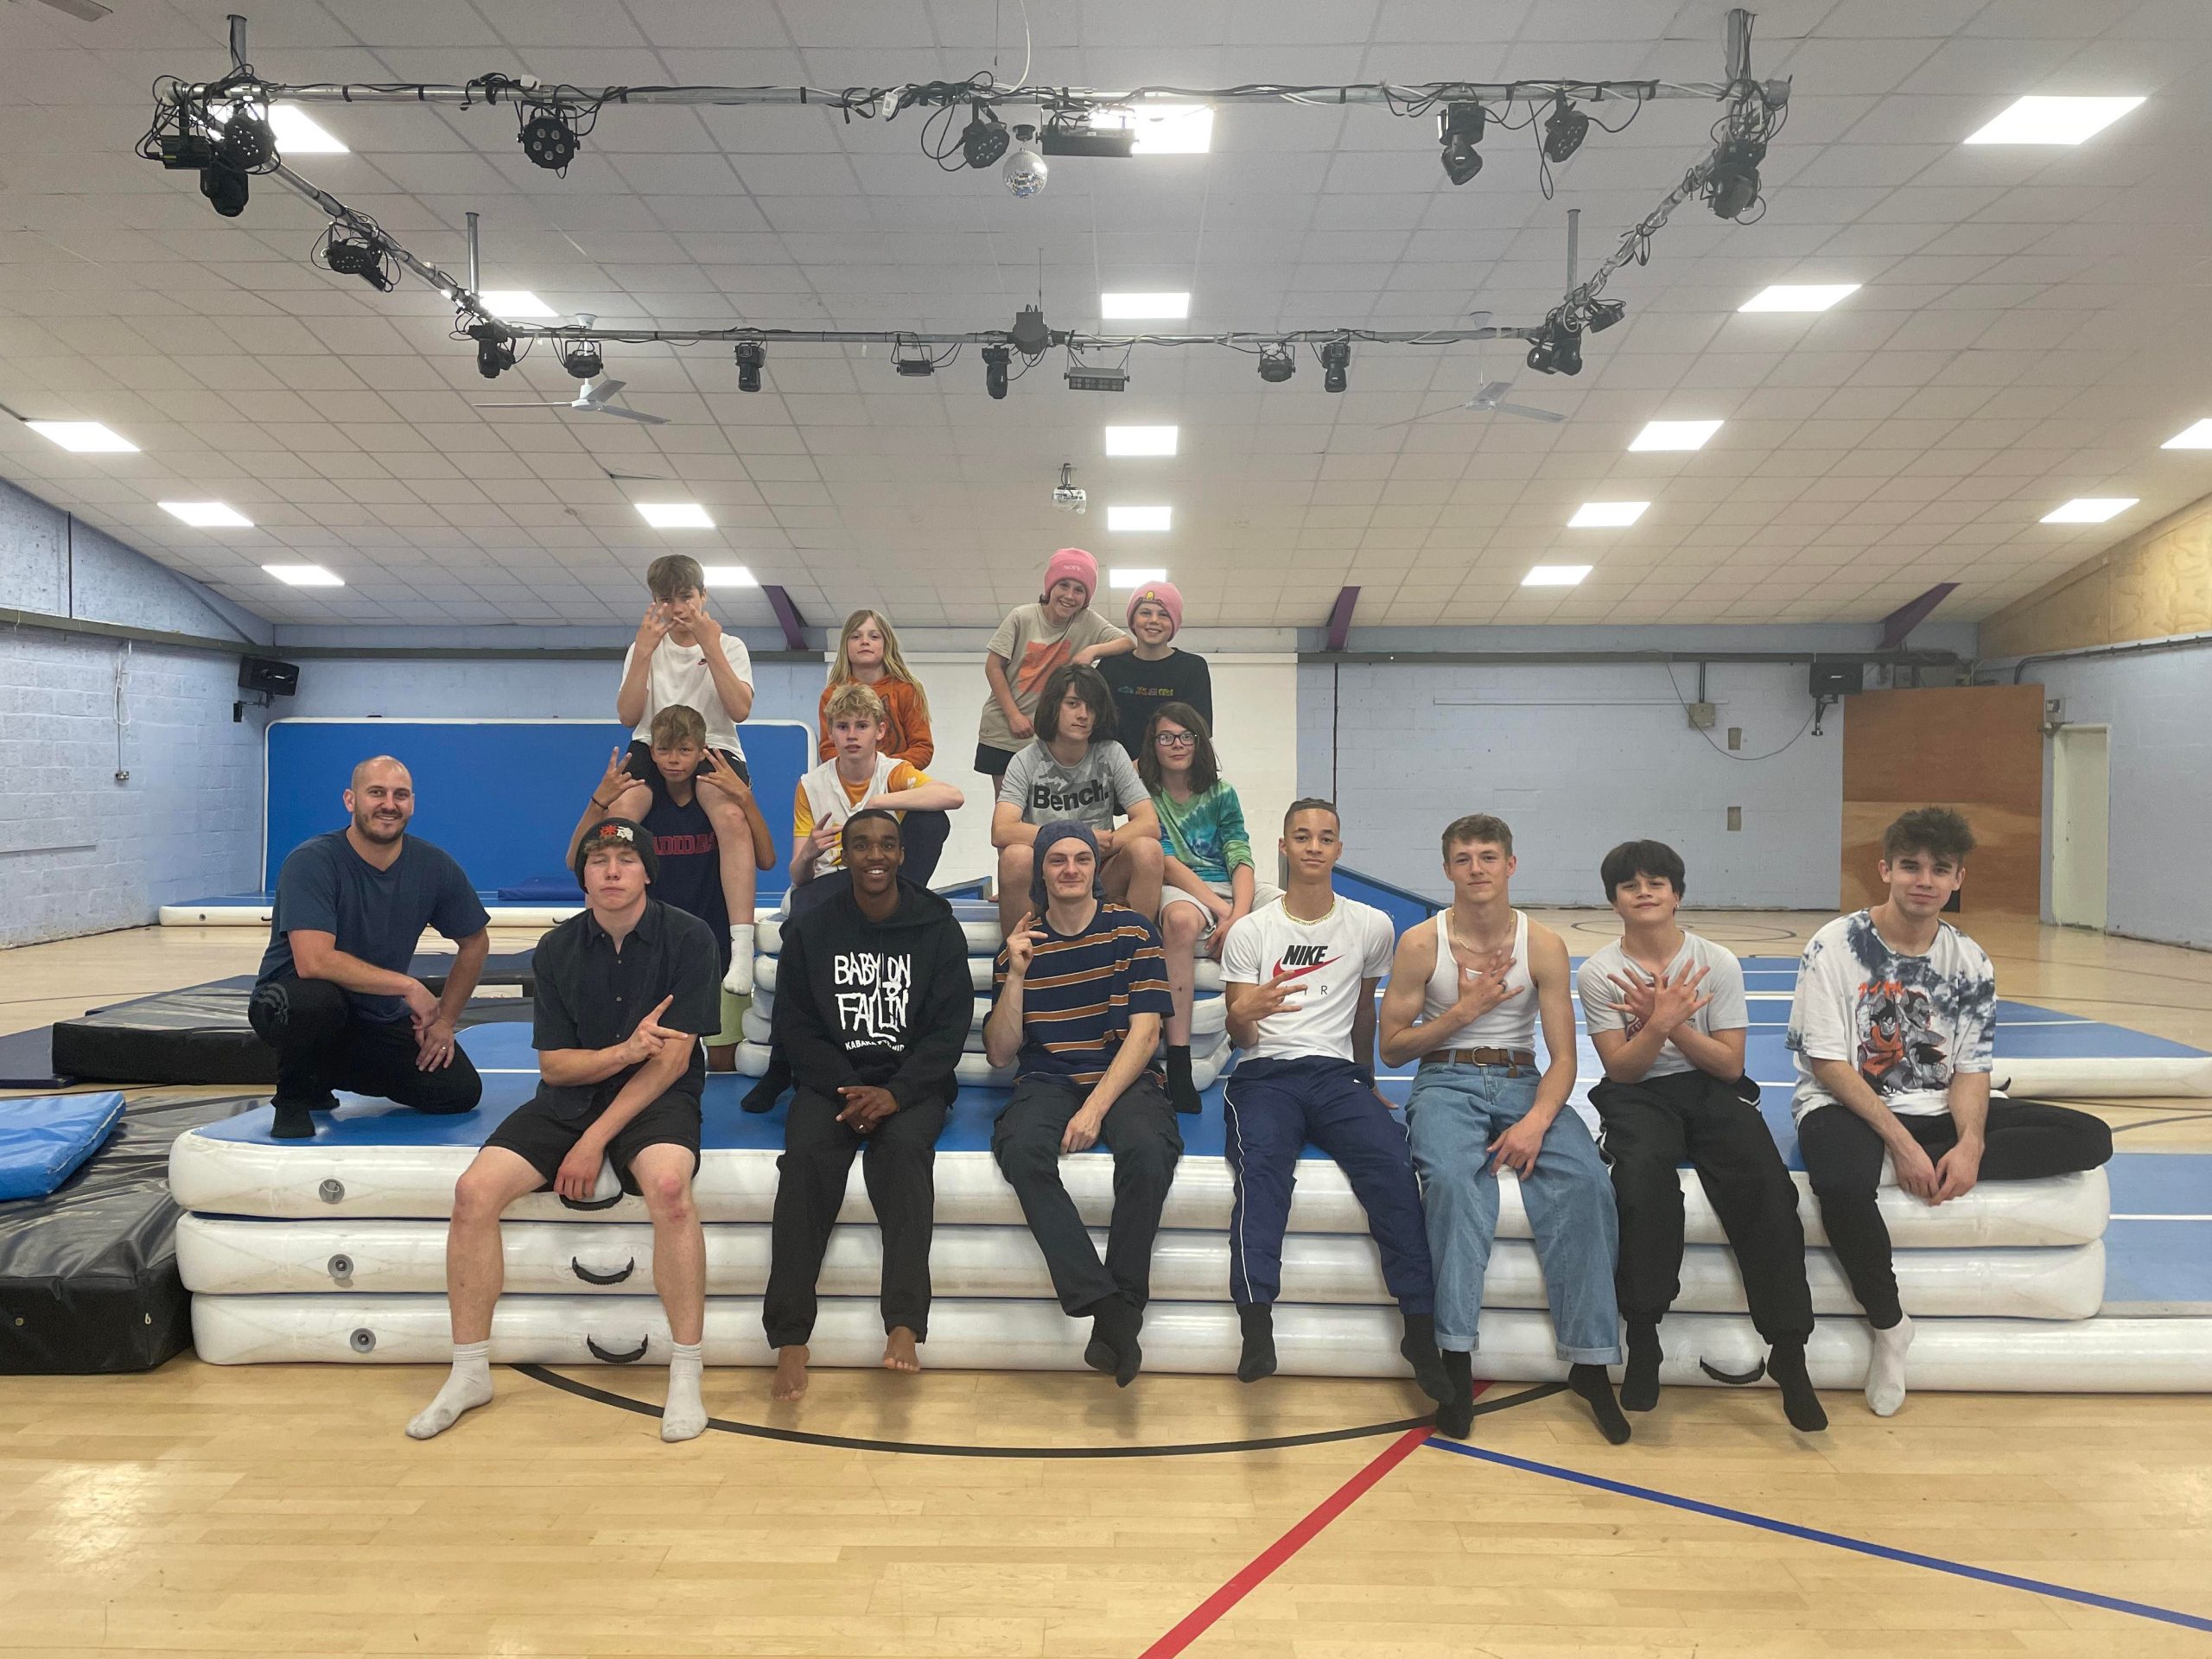 FEATURED | Dirty Feet Dance – The club that is giving young Hereford children and teenagers dreams of reaching the Olympics